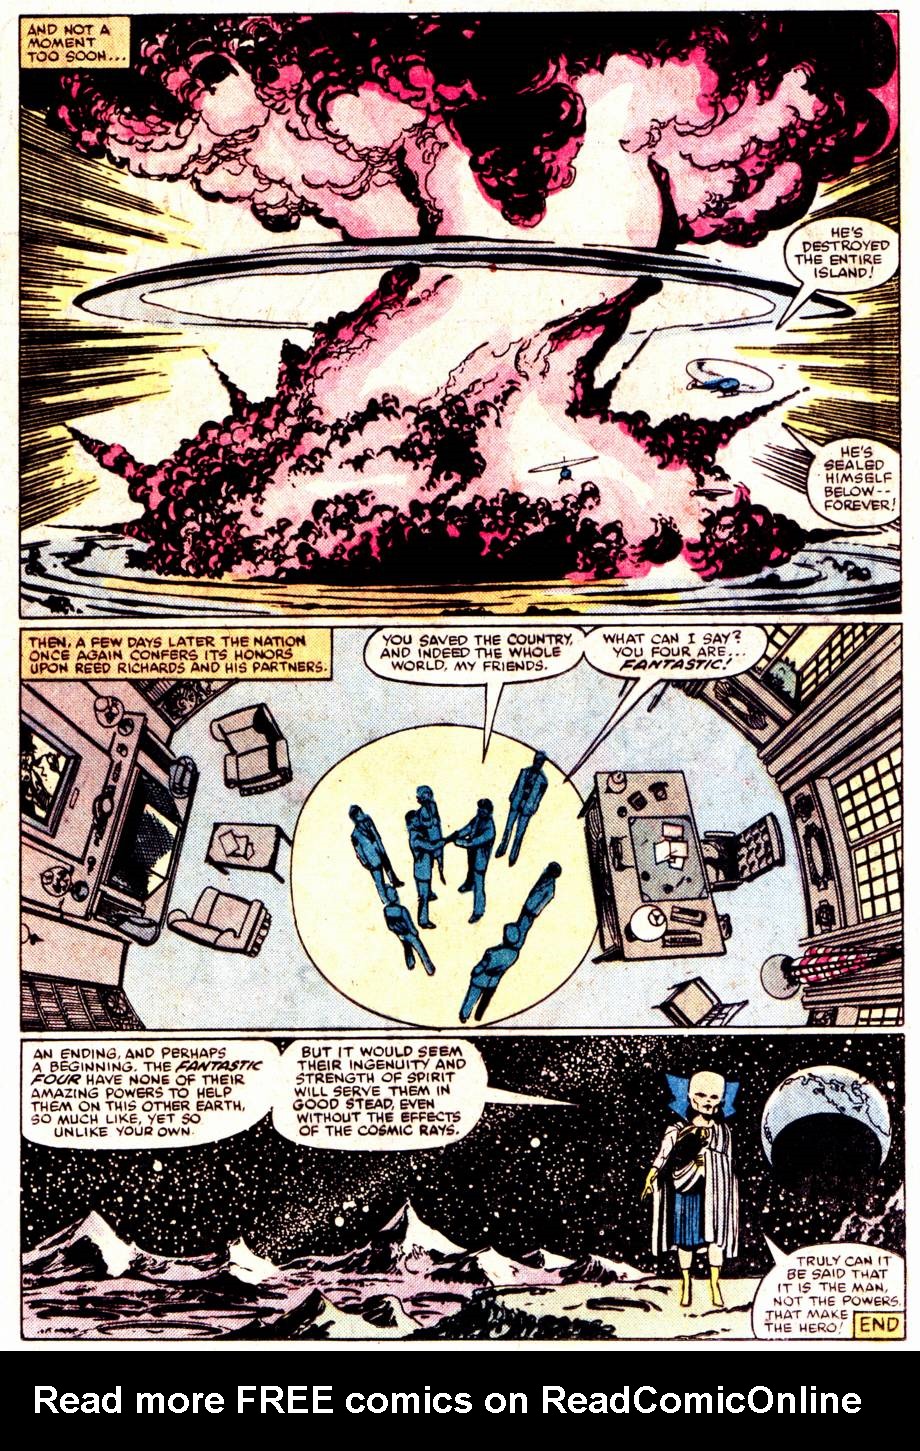 What If? (1977) issue 36 - The Fantastic Four Had Not Gained Their Powers - Page 21